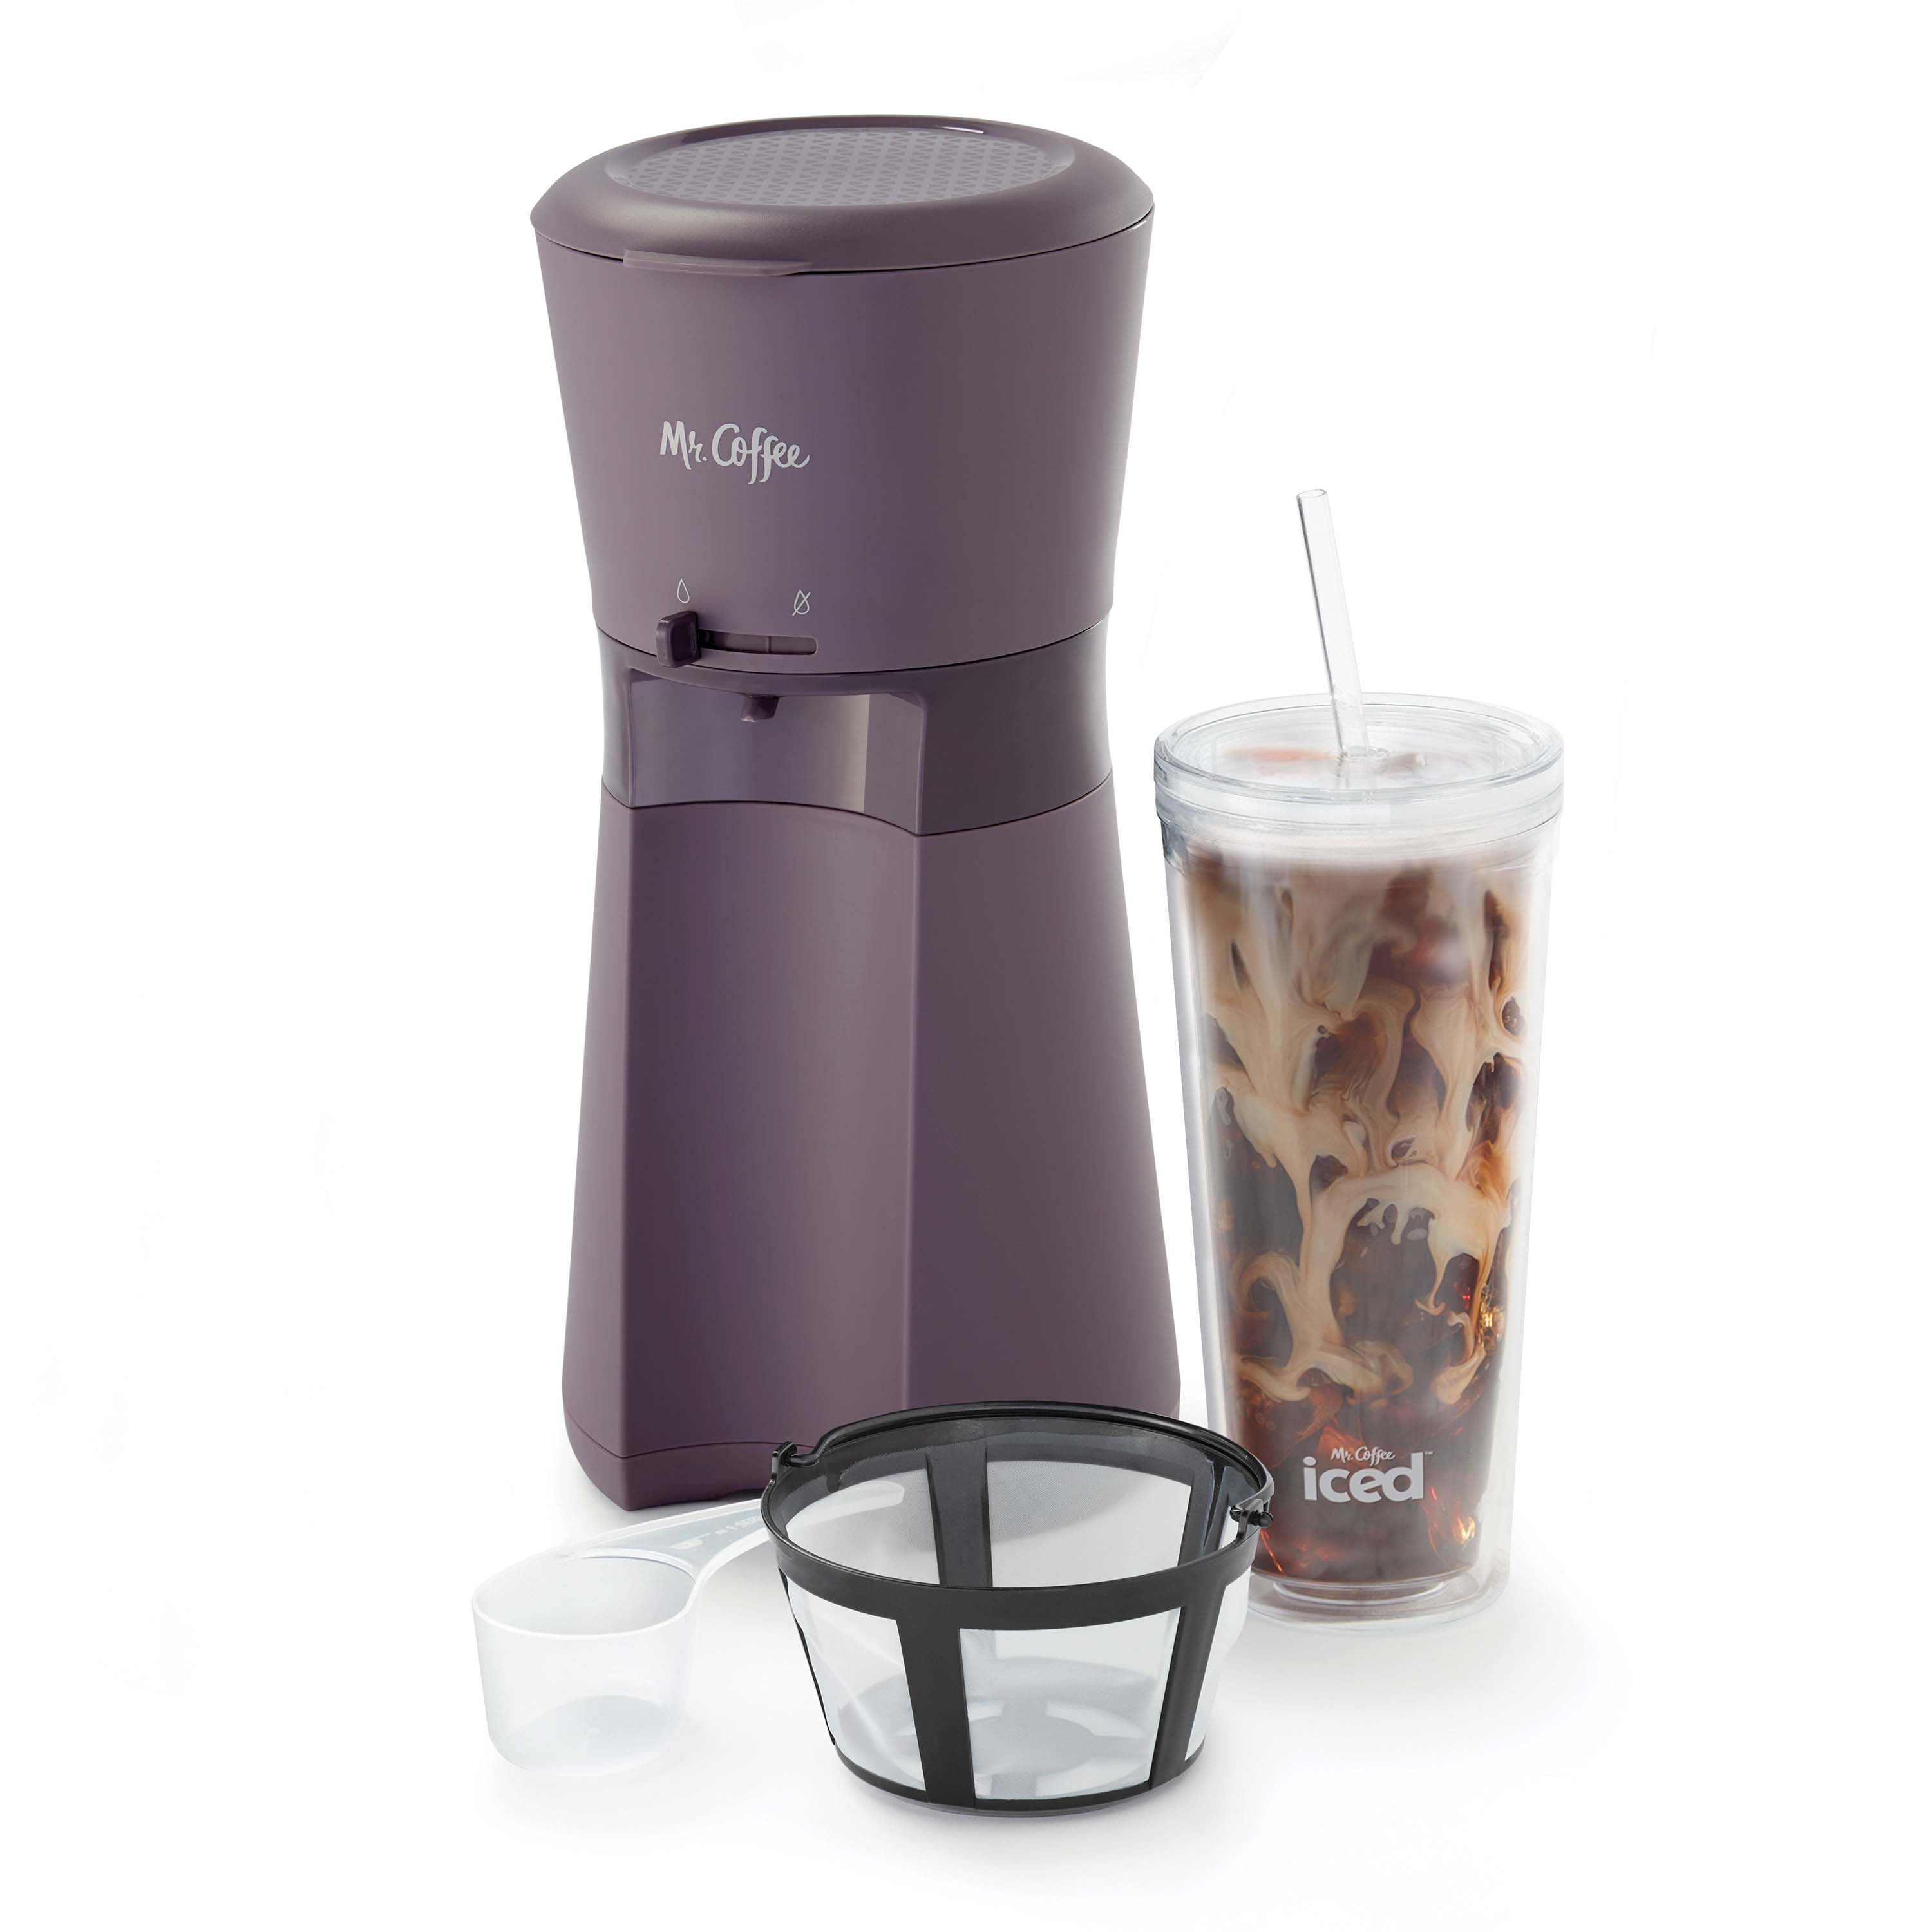 Mr. Coffee Iced Coffee Maker with Reusable Tumbler and Coffee Filter - Lavender